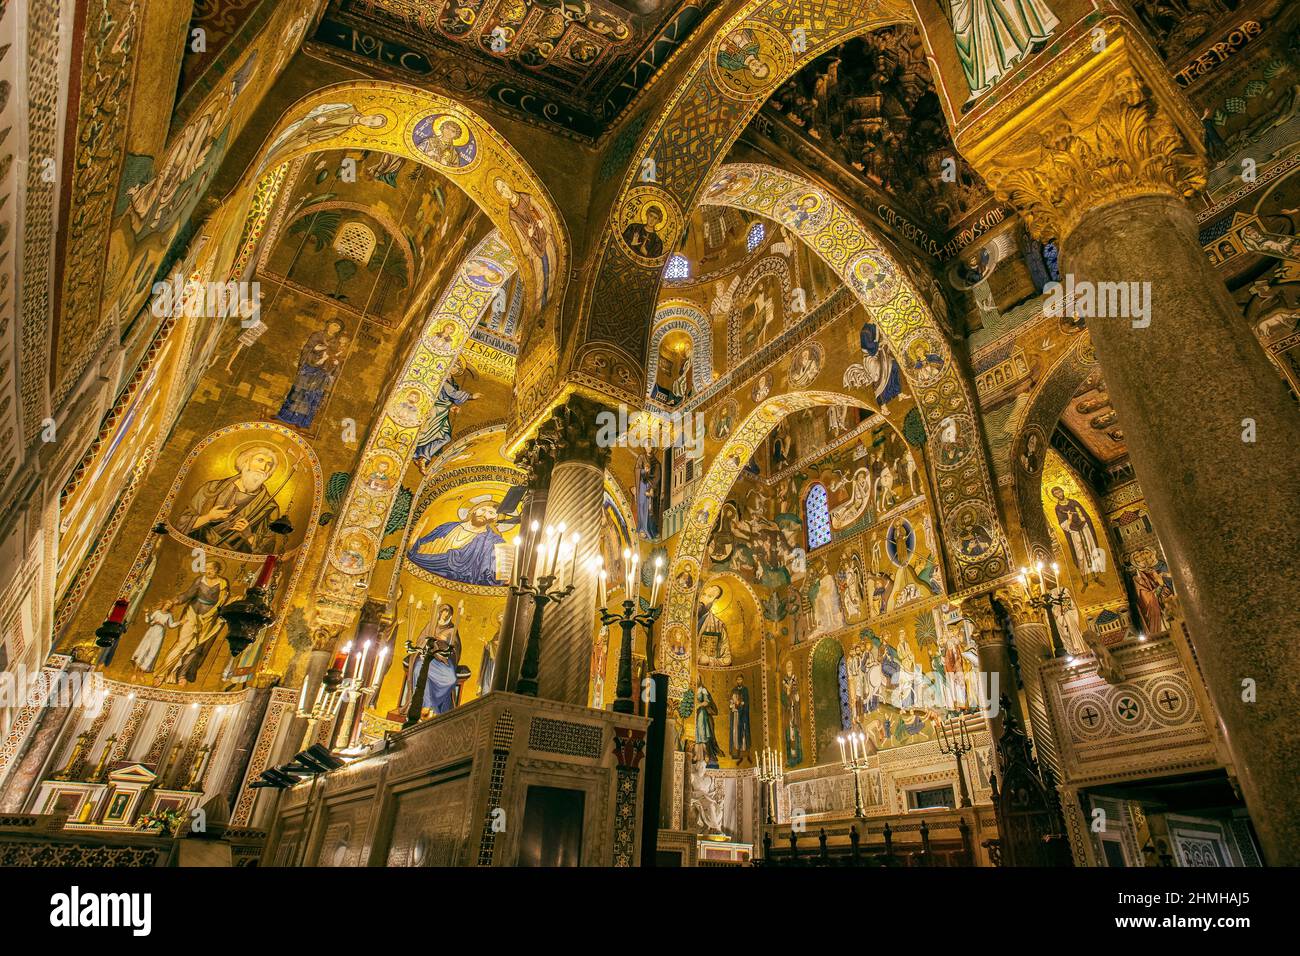 Cappella Palatina (Palatine Chapel) with magnificent gold mosaics in the Palazzo Reale (Palazzo dei Normanni), Palermo, Sicily, Italy Stock Photo